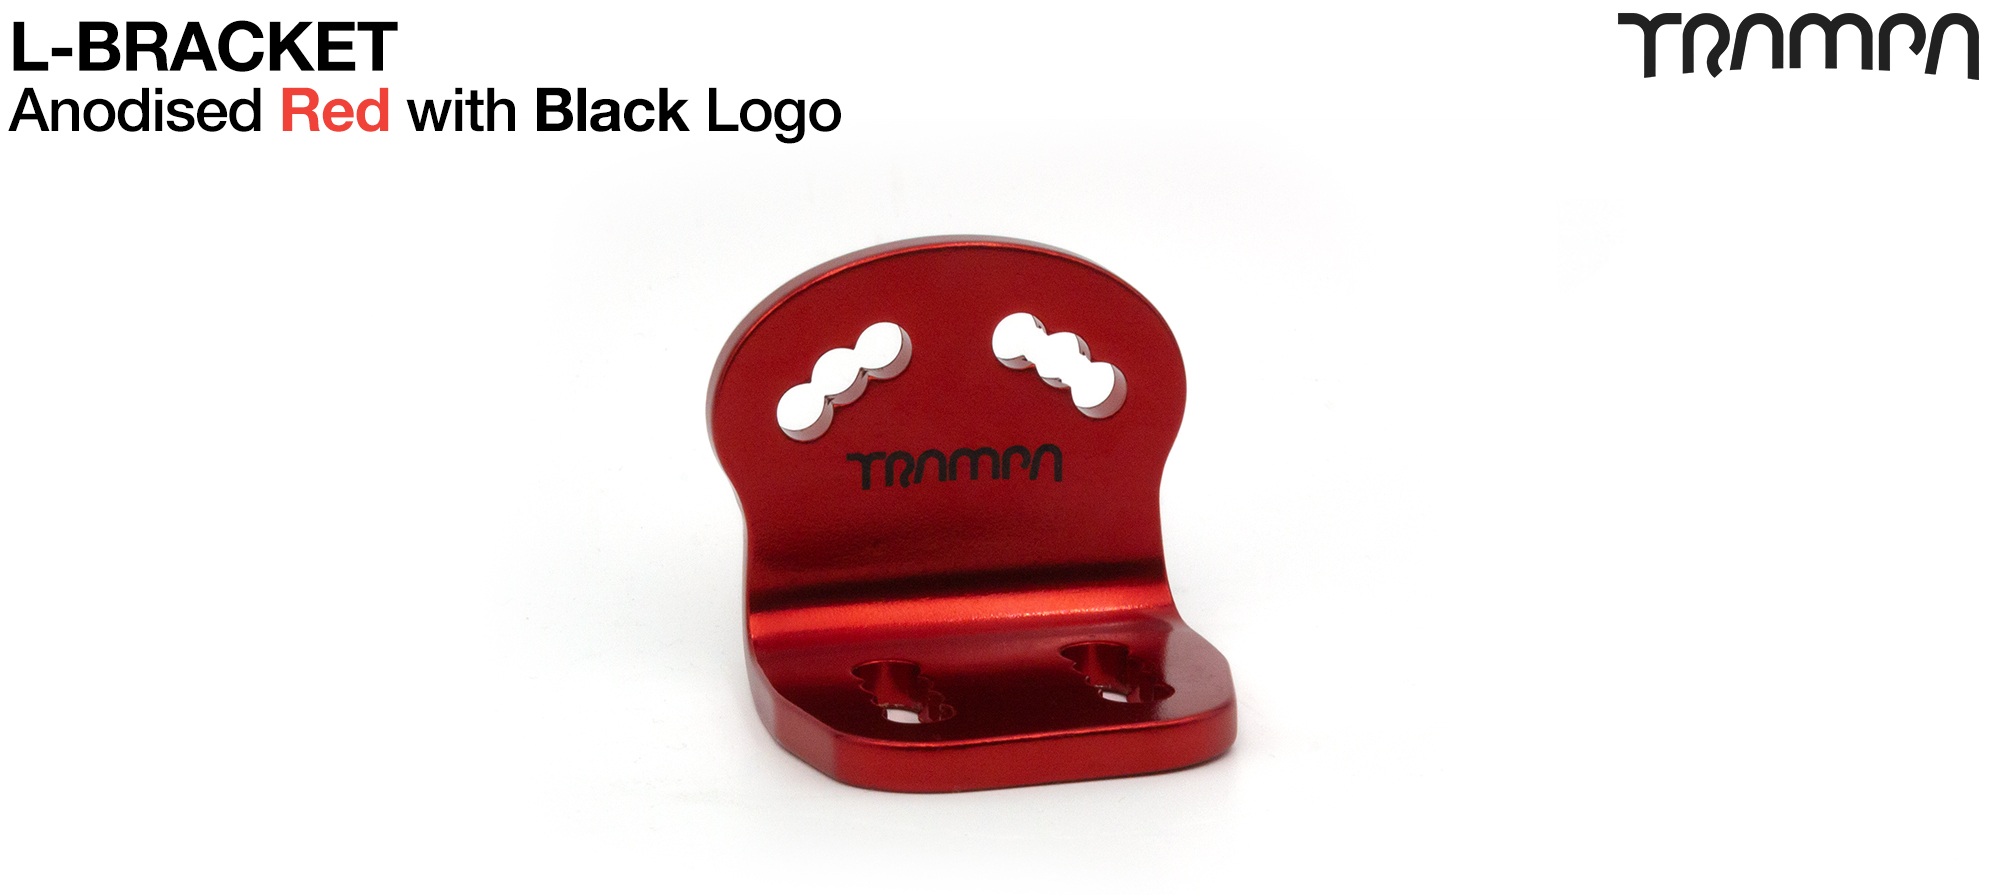 L Bracket - Anodised RED with BLACK logo 